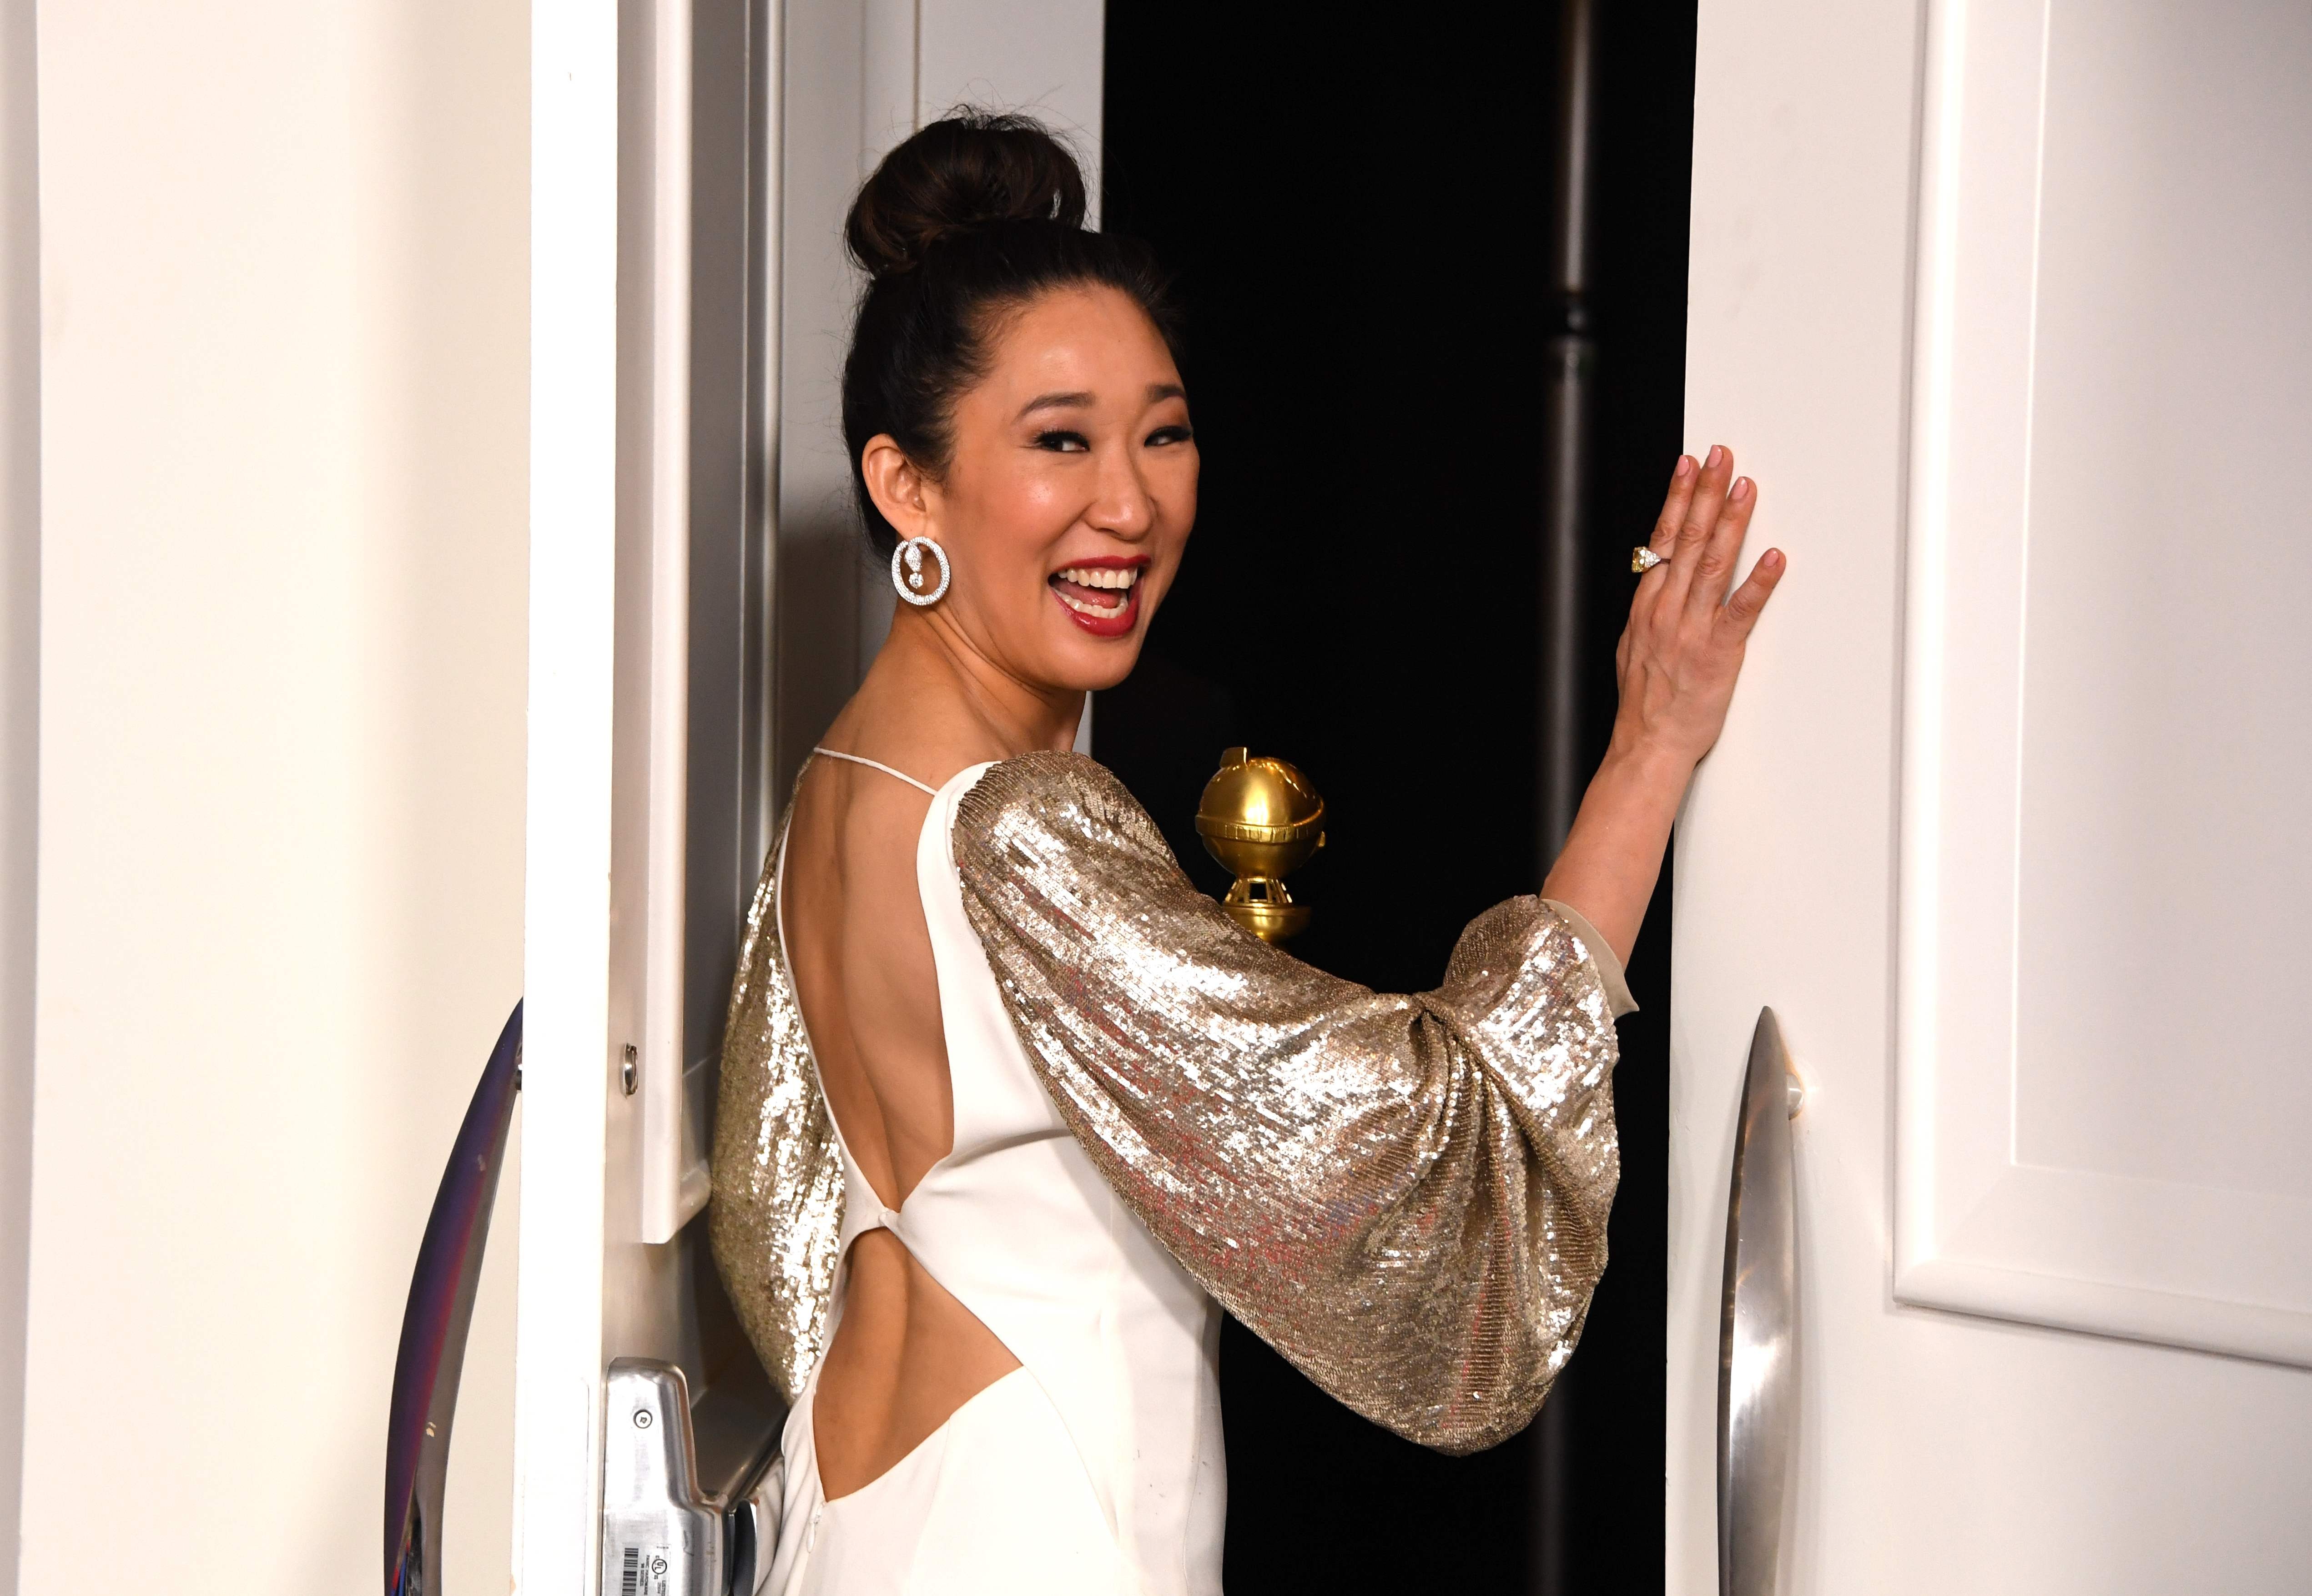 Golden Globes host Sandra Oh poses with her own trophy for best actress in a television drama for her role in ‘Killing Eve’ at the 76th annual Golden Globes in Beverly Hills, California. Photo: AFP